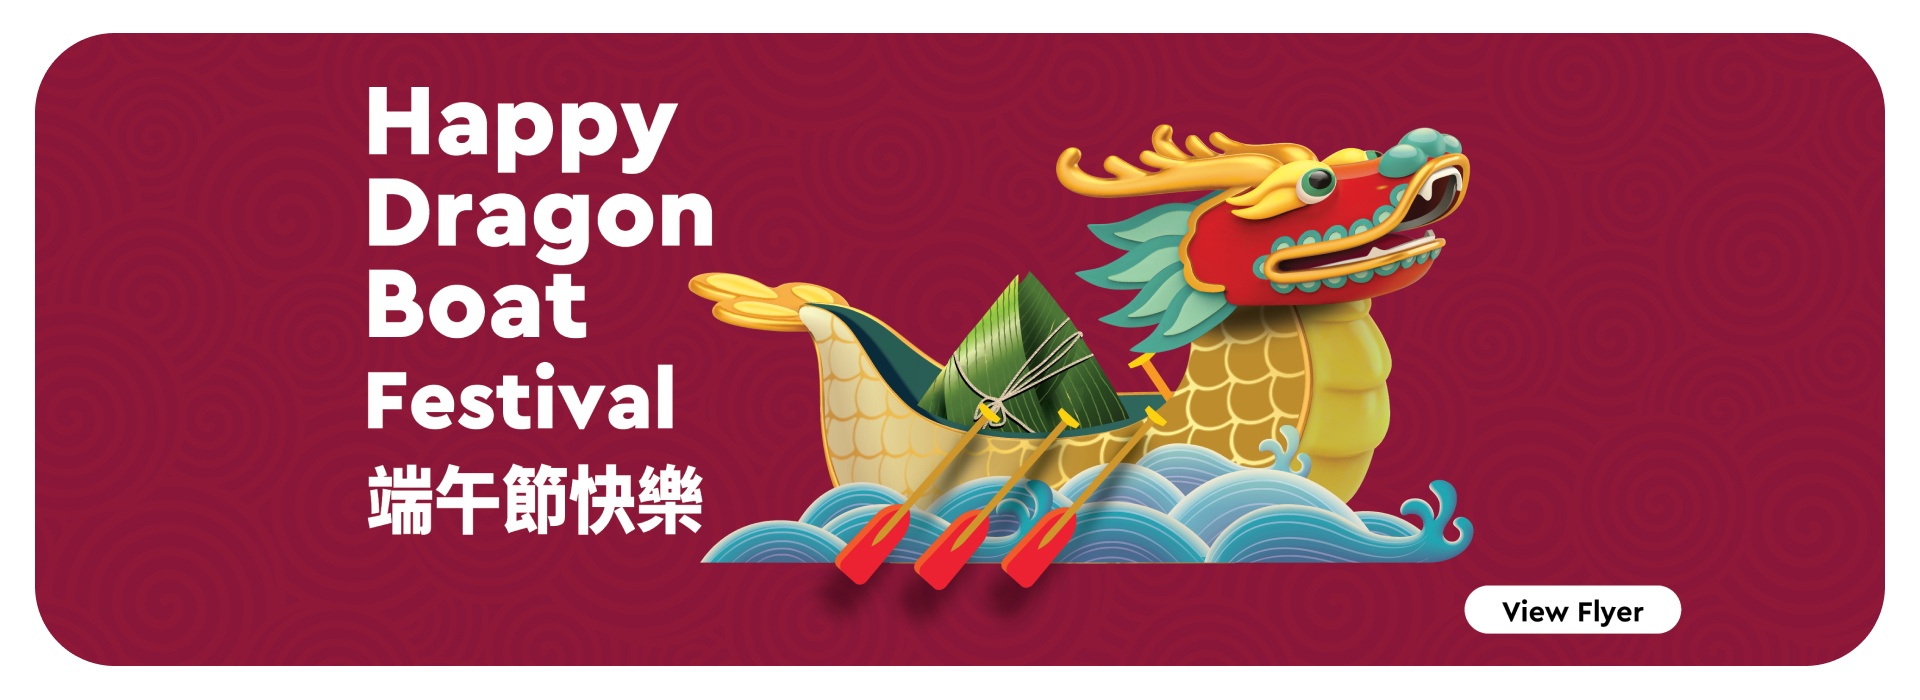 The following image contains the text," Happy Dragon Boat Festival along with the 'view flyer' button."